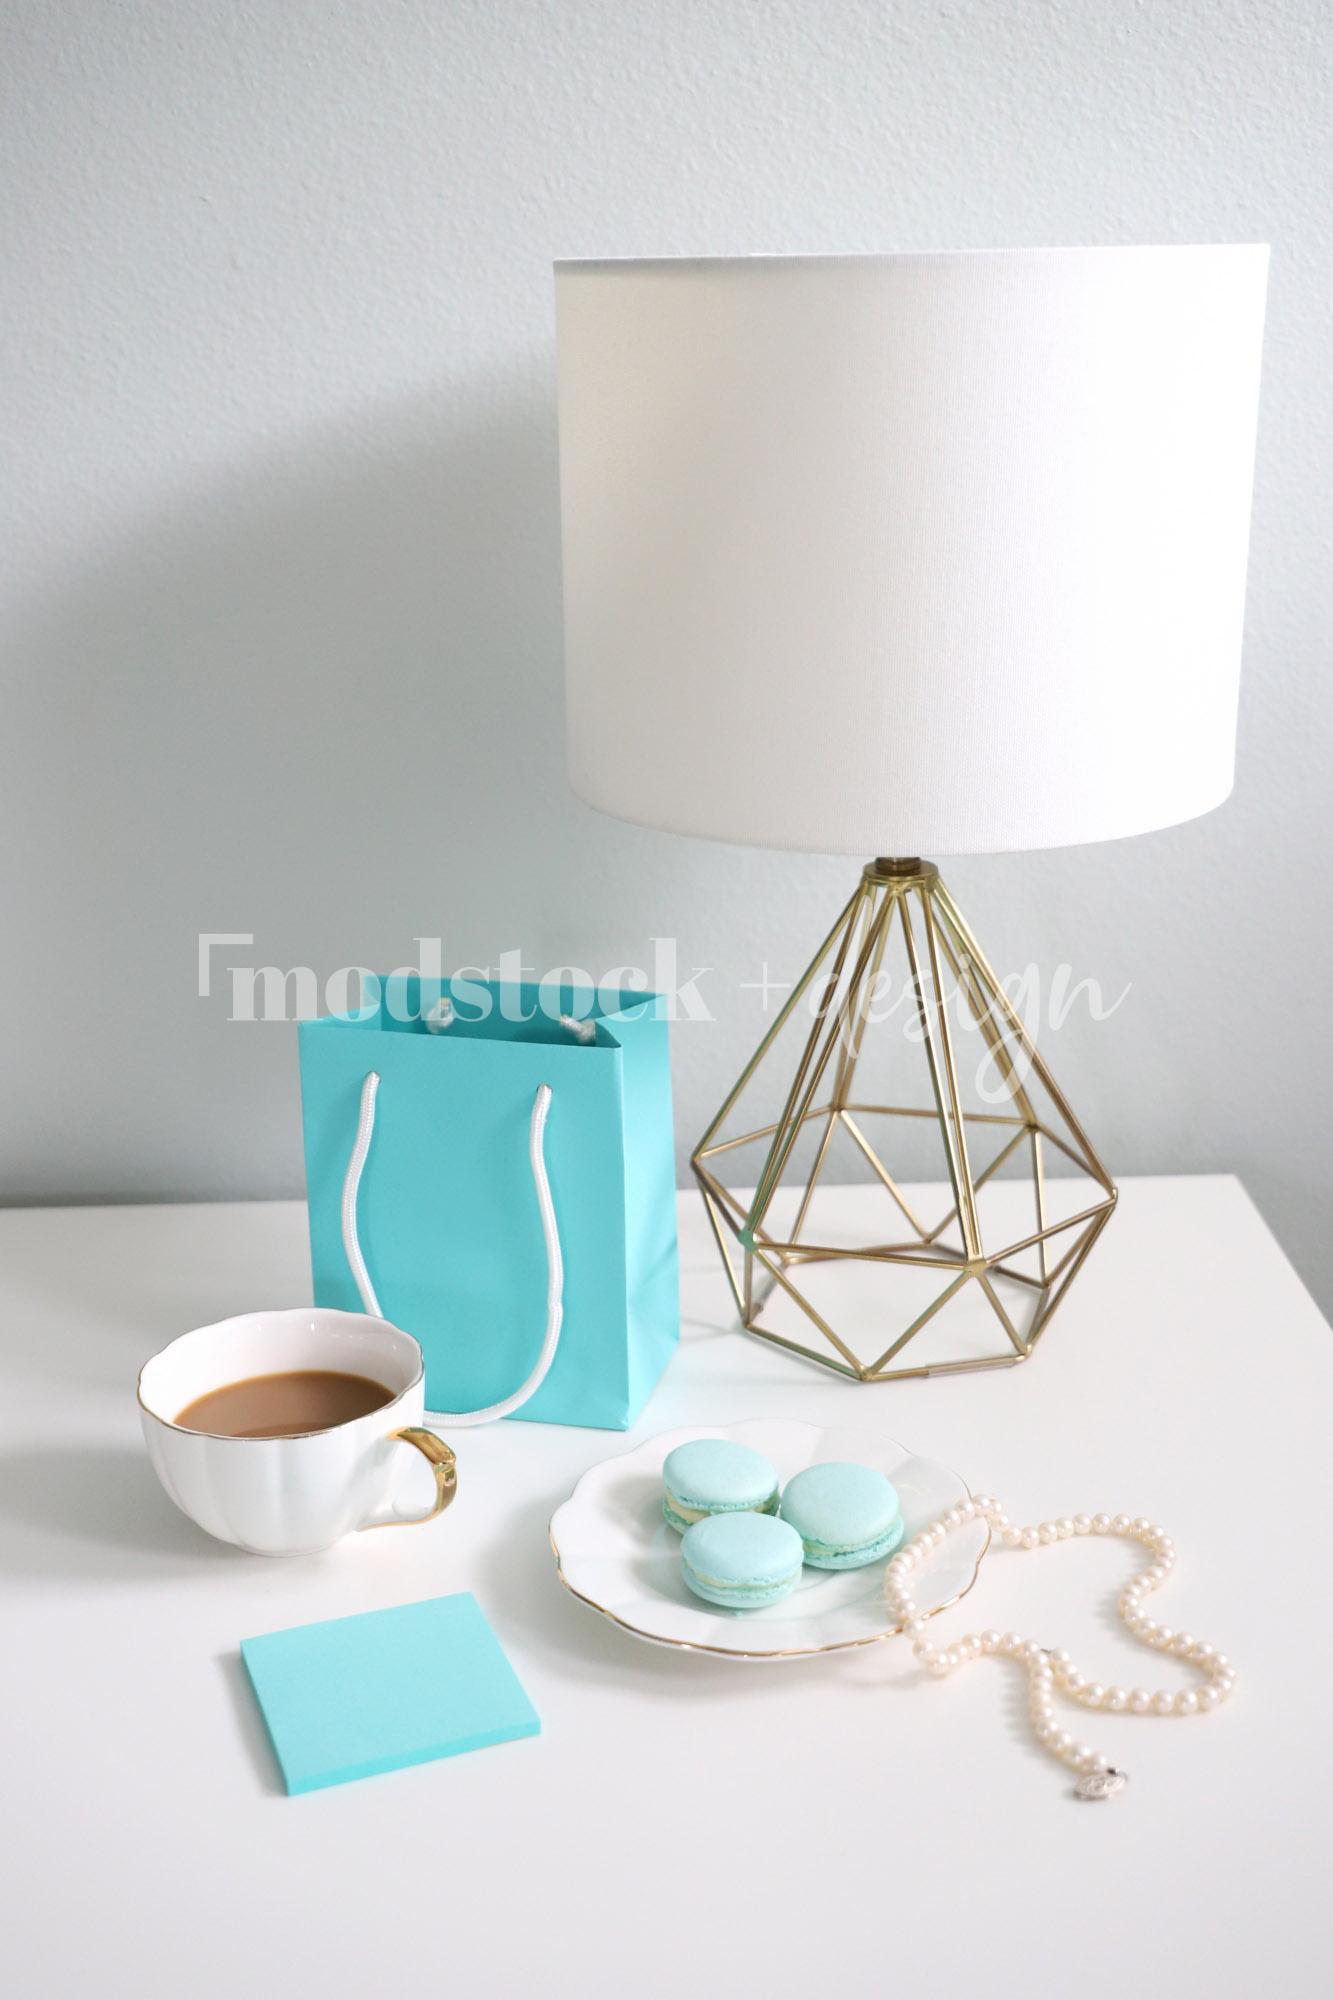 Modstock Luxe Teal Workspace - Gold 25